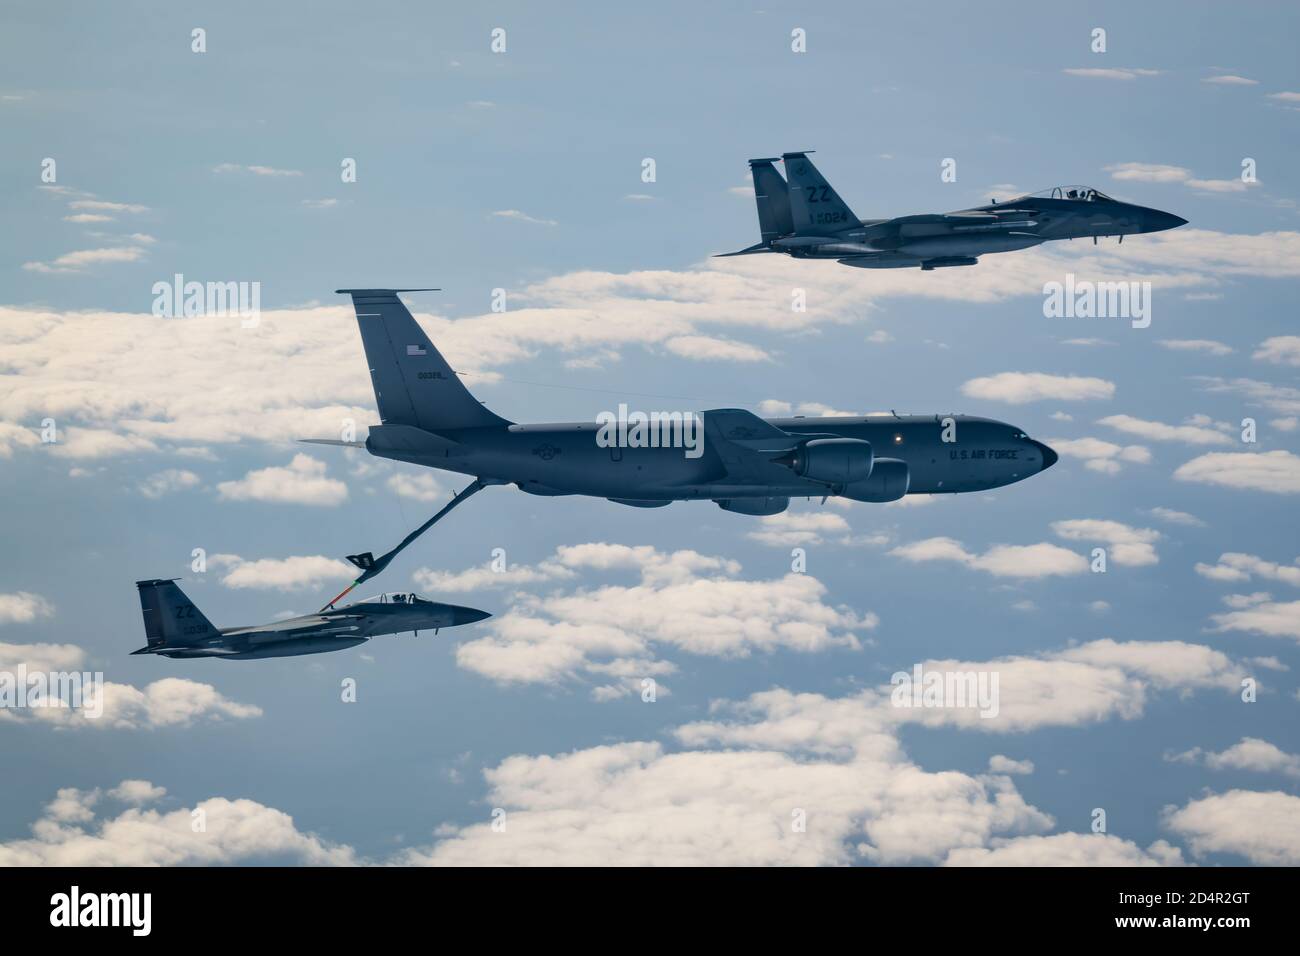 Two F-15C Eagles from the 44th Fighter Squadron refuel with a KC-135 Stratotanker from the 909th Air Refueling Squadron Jan. 10, 2020, during exercise WestPac Rumrunner out of Kadena Air Base, Japan. Rumrunner represents an evolution in the capabilities of 18th Wing assets to work with joint partners to defend American allies and ensures a free-and open Indo-Pacific region. (U.S. Air Force photo by Senior Airman Matthew Seefeldt) Stock Photo